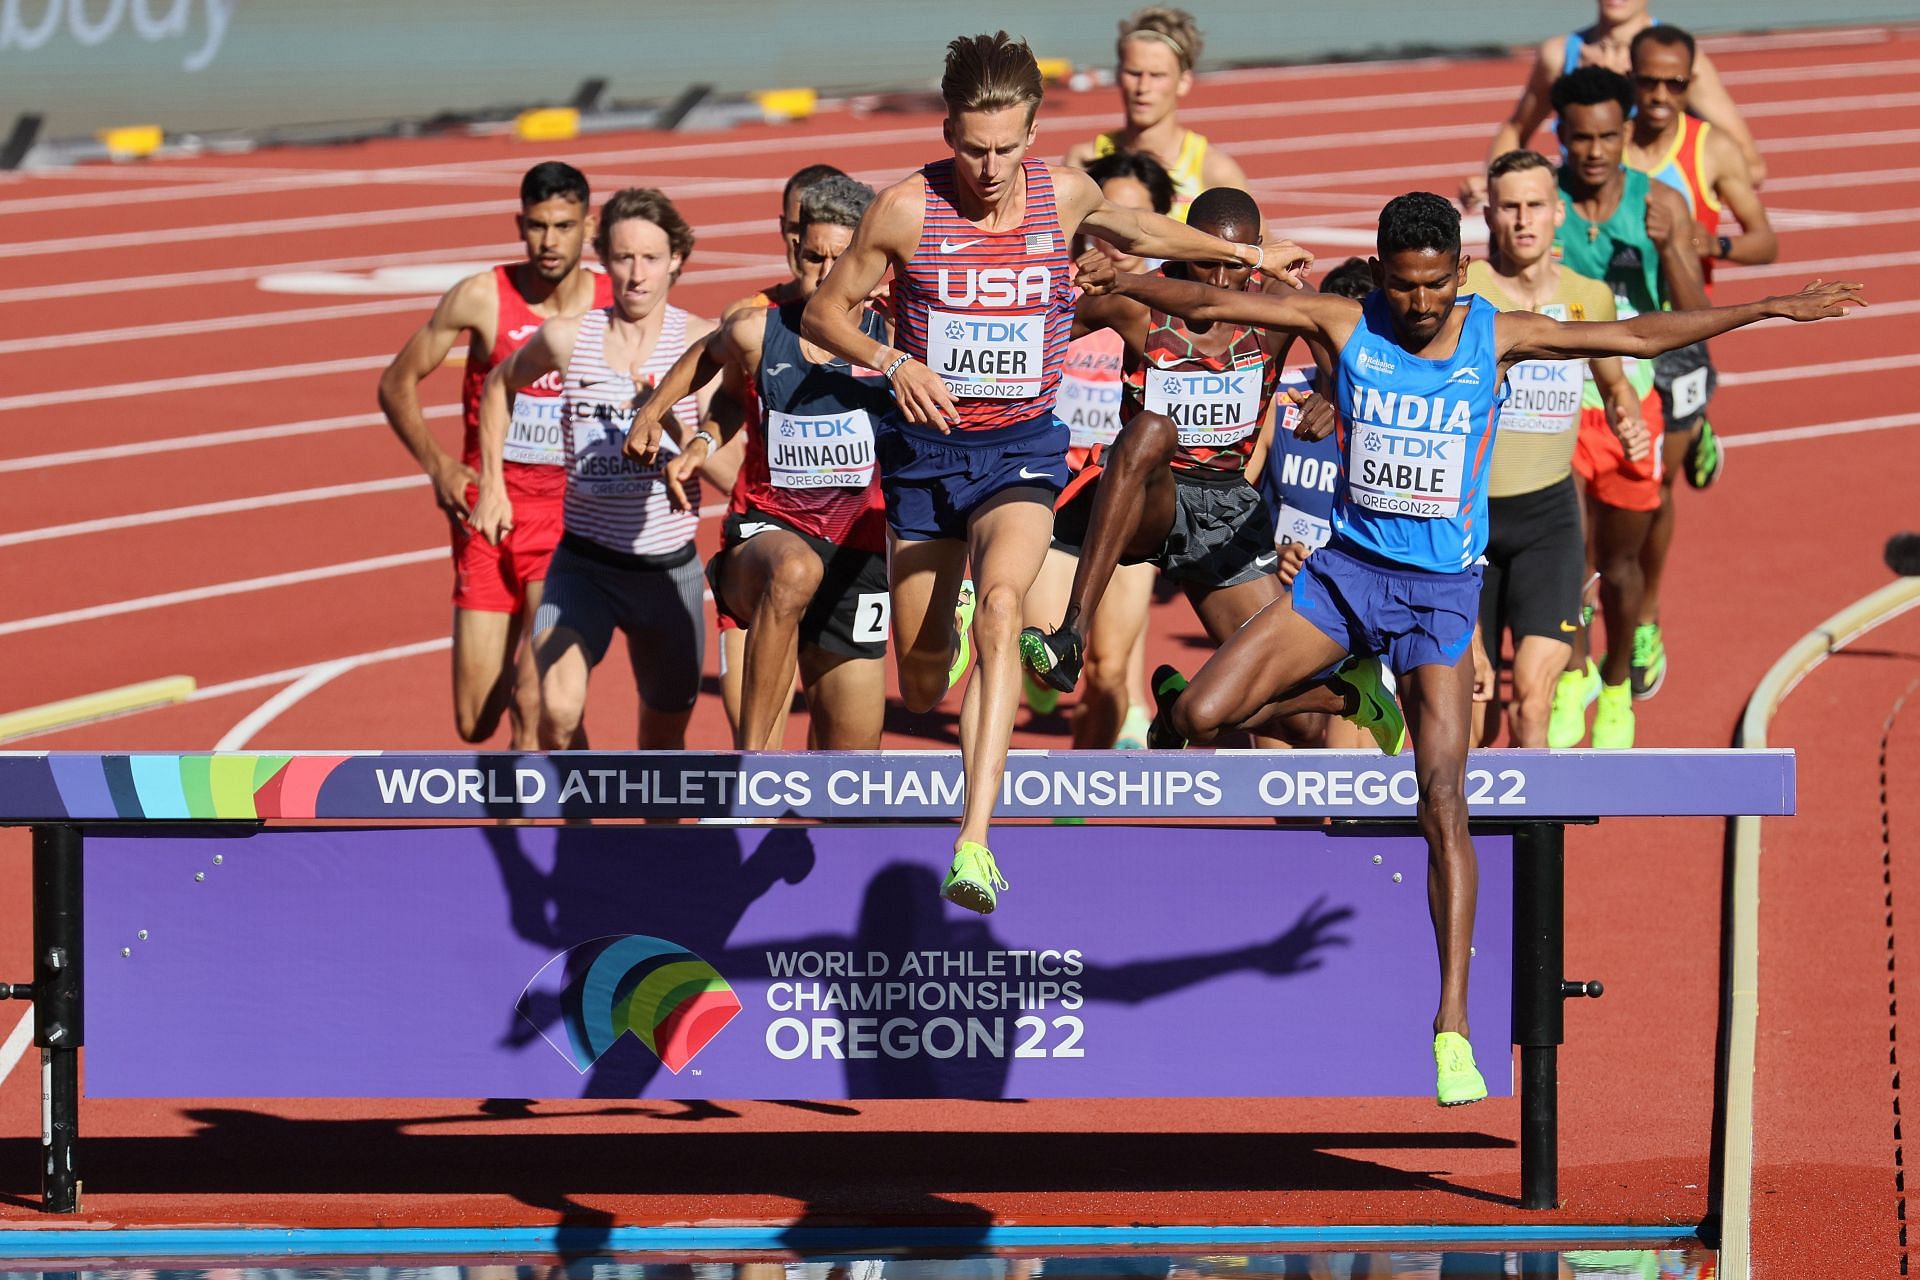 World Athletics Championships Oregon22 - Evan Jager (USA) and Avinash Sable (India) in action in the Men&rsquo;s 3000 Meter Steeplechase heats.